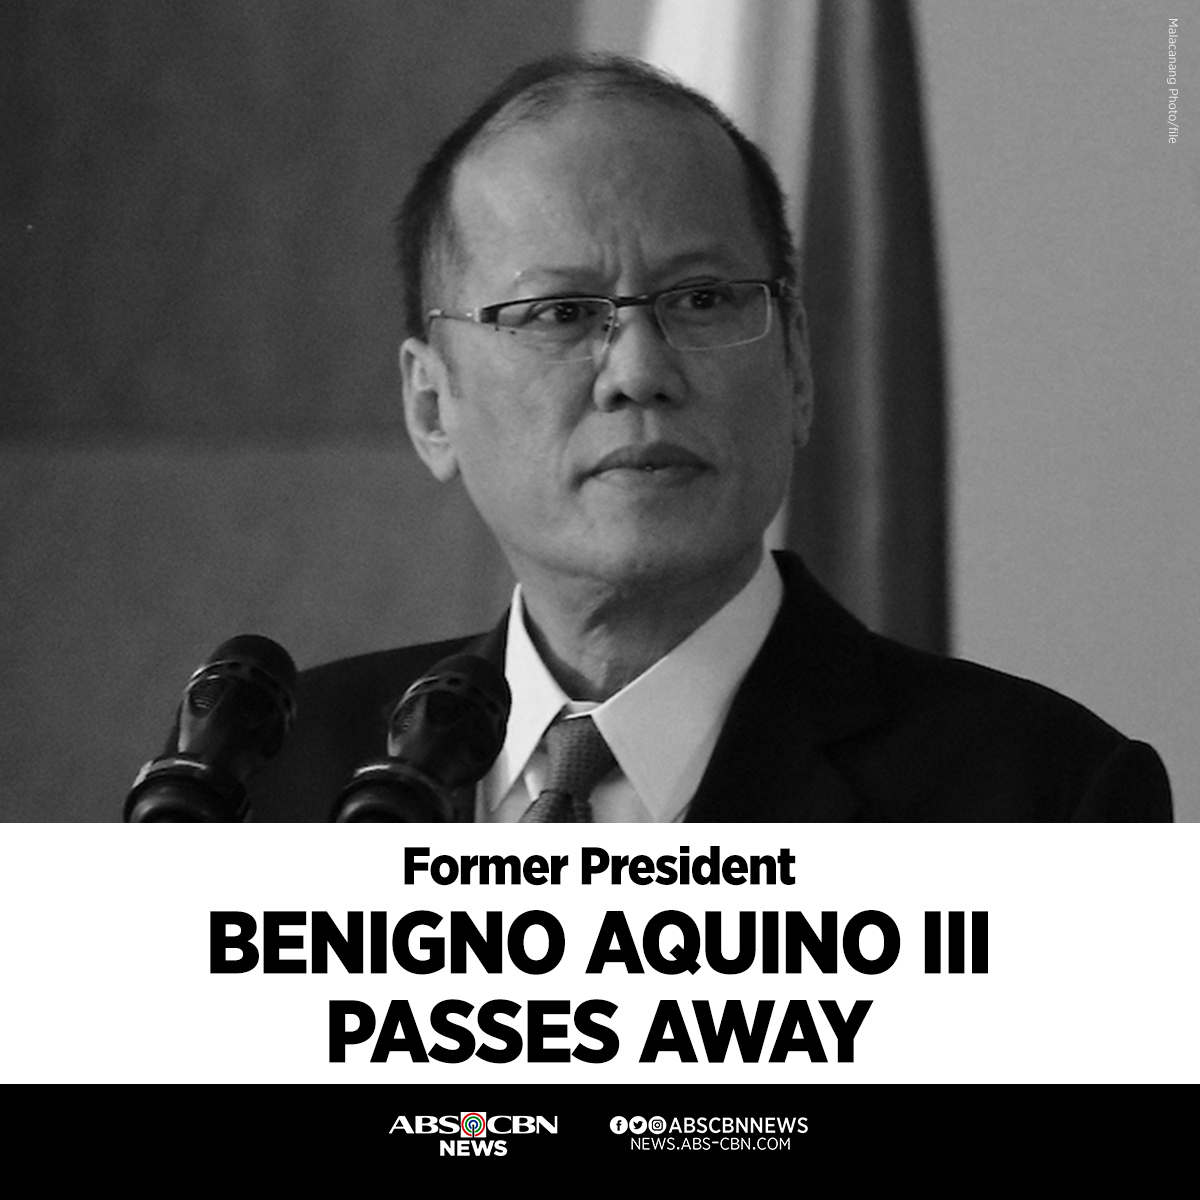 Former president Benigno 'Noynoy' Aquino III passed away on Thursday, just 5 years after he stepped down from office, according to a member of the family who asked not to be named pending official announcement. Aquino was 61 years old. READ: bit.ly/35KU8mA